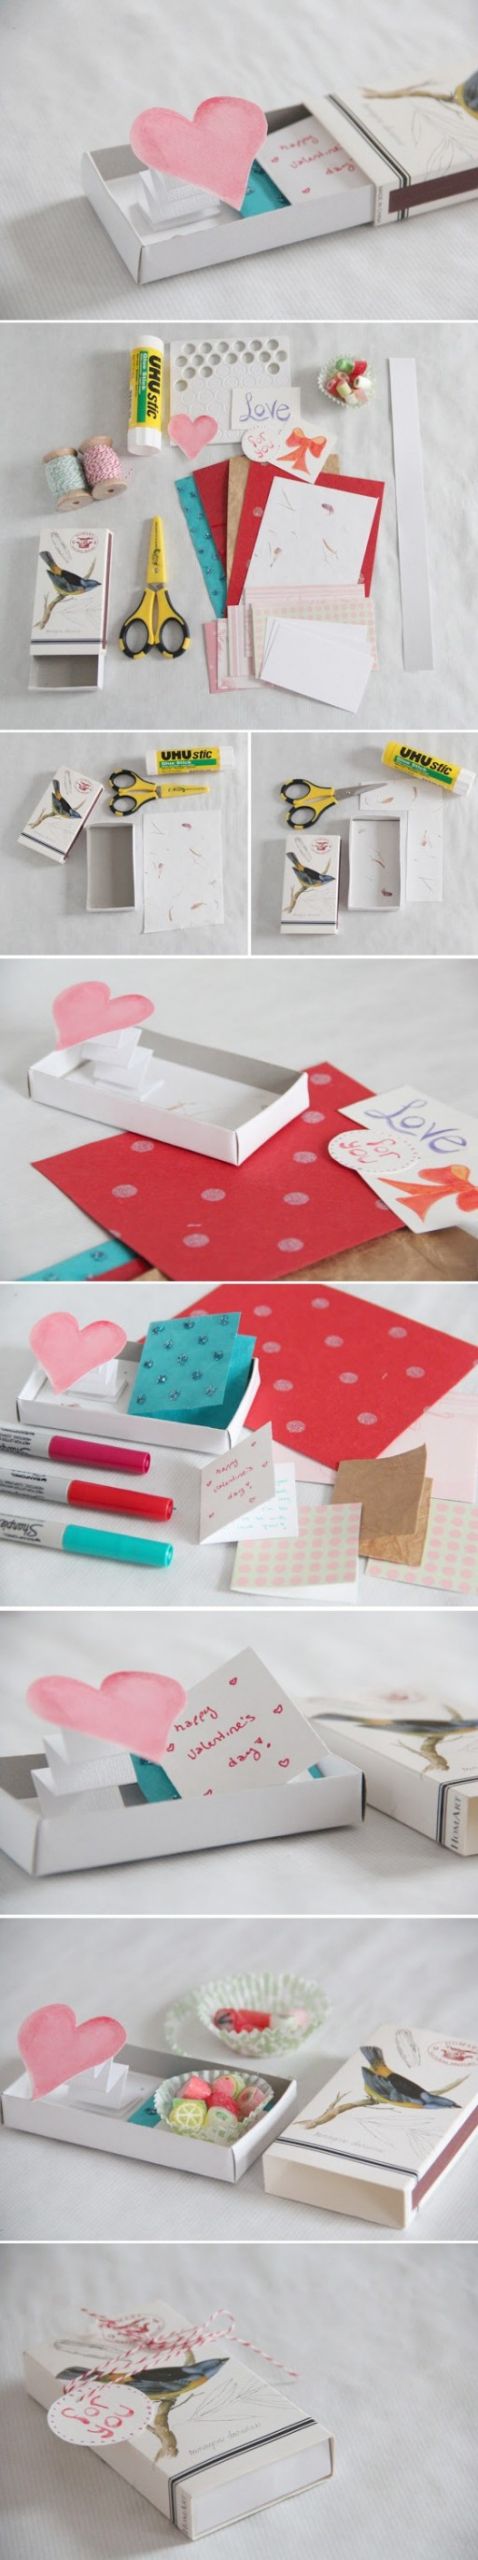 DIY Step Up Box
 How To Make Pop Up Love Gift Box Step By Step DIY Tutorial